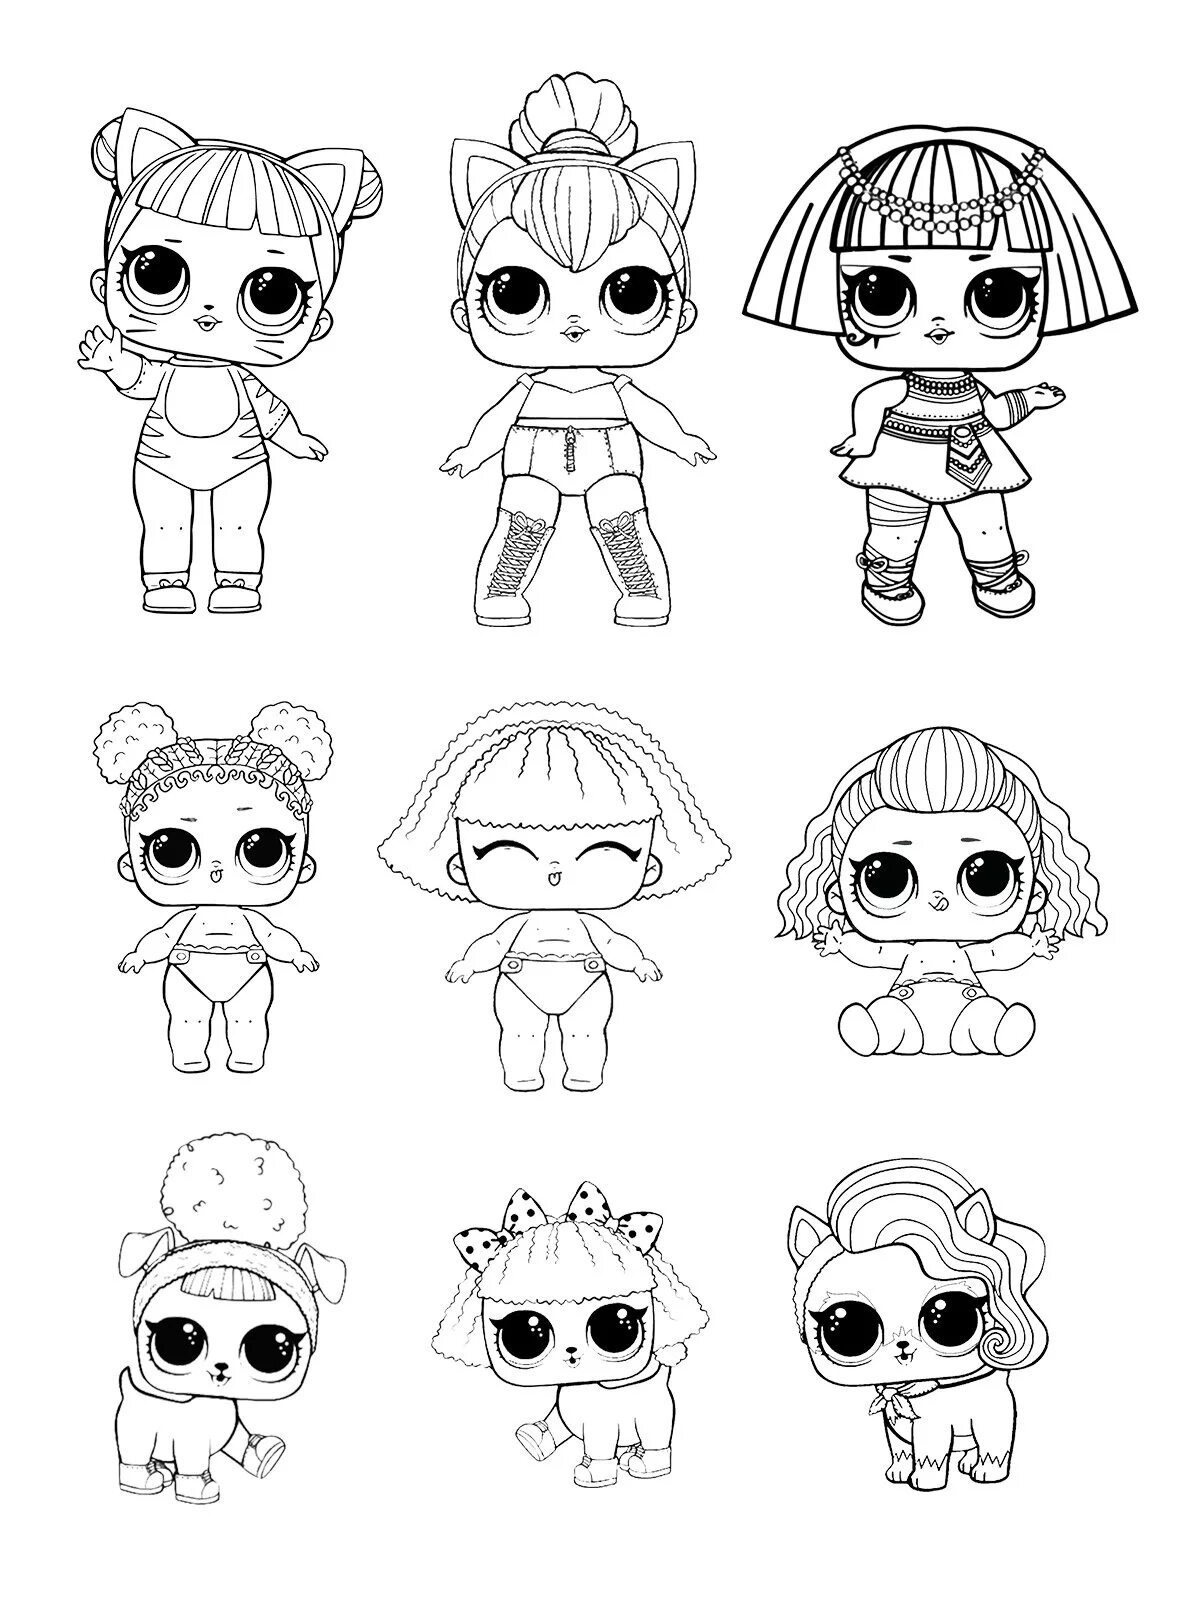 Dazzling lol doll coloring